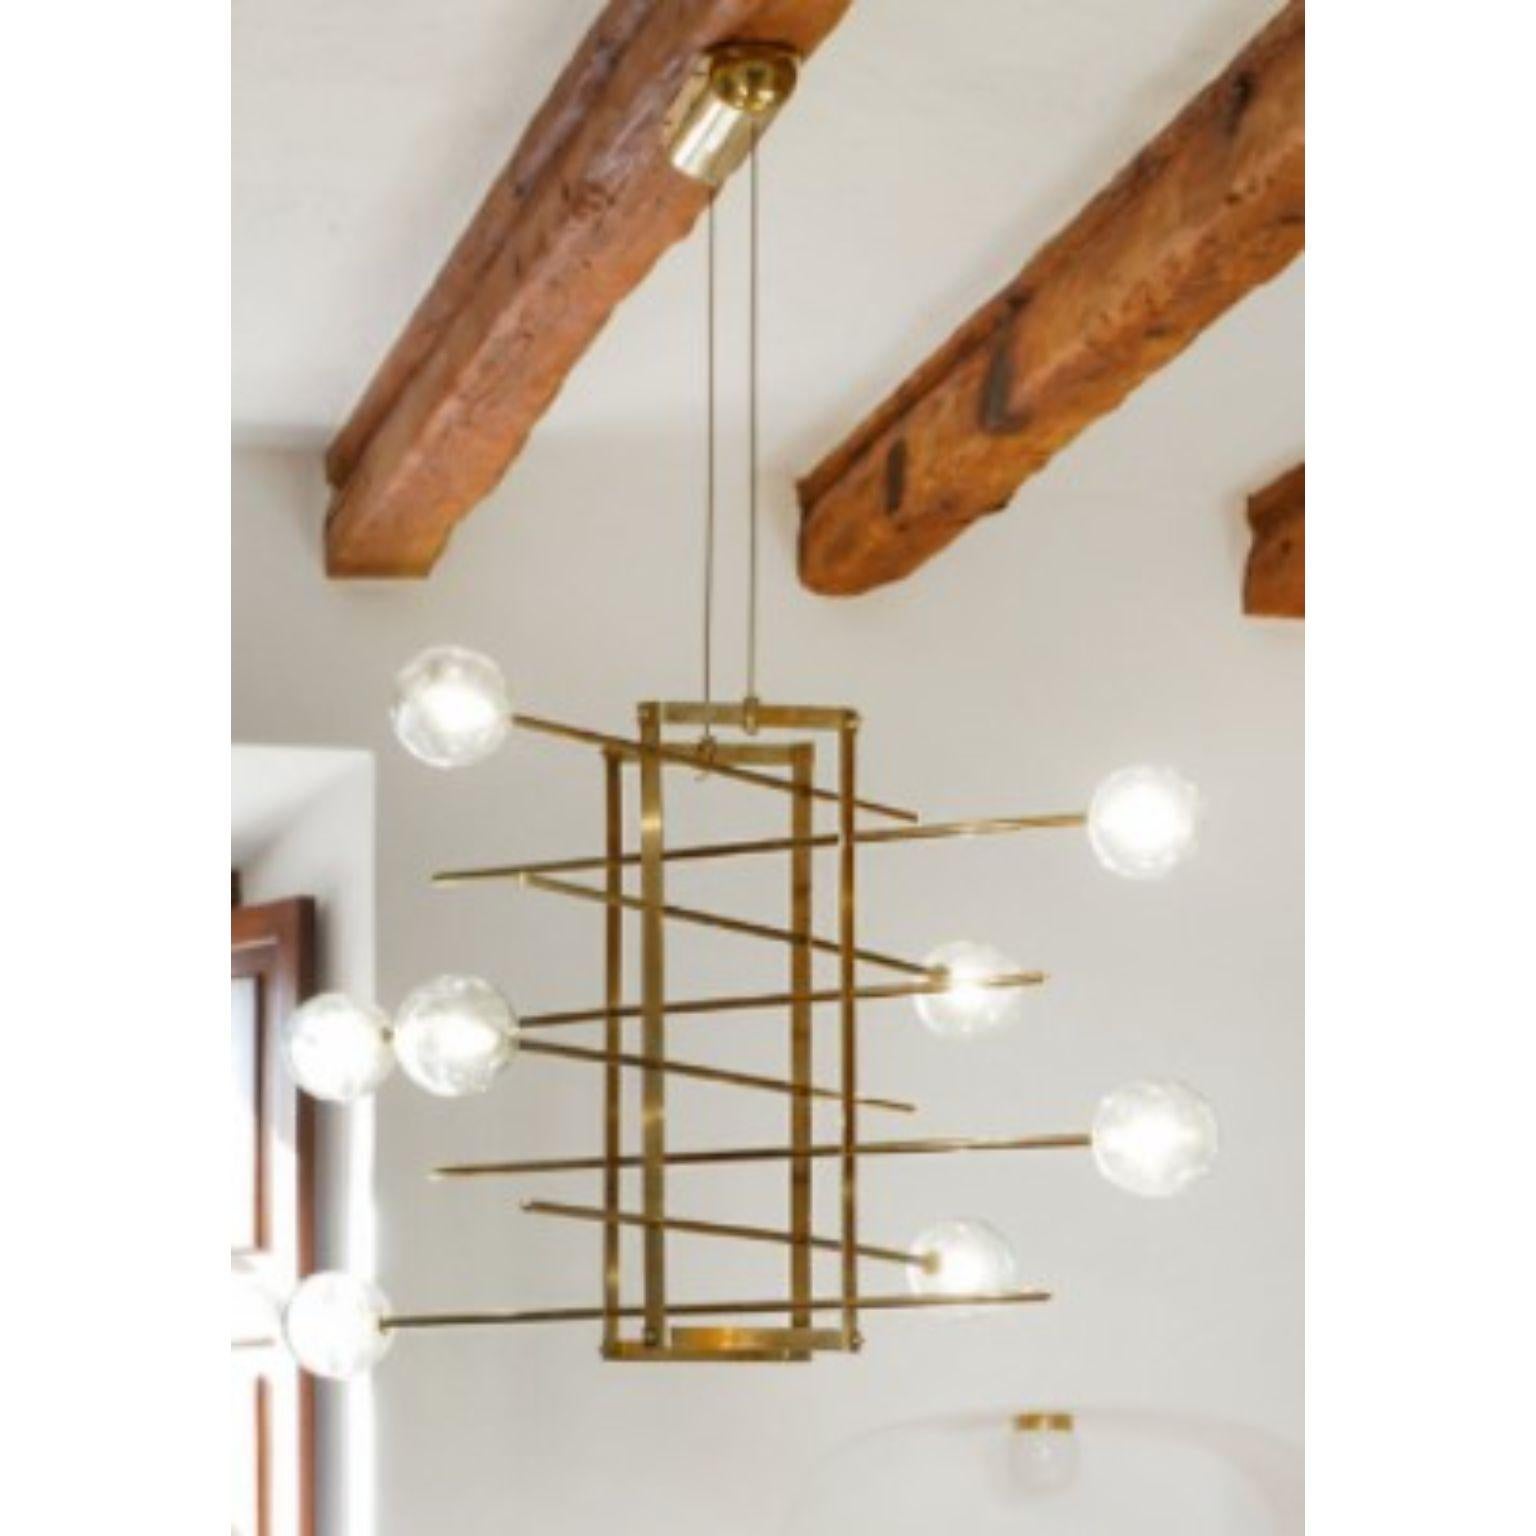 Modular chandelier 8 lamps by Contain
Dimensions: D85 x W85 x H60cm (custom length).
Materials: Brass structure, blown glass from local production.
Available in different finishes and dimensions. 

All our lamps can be wired according to each